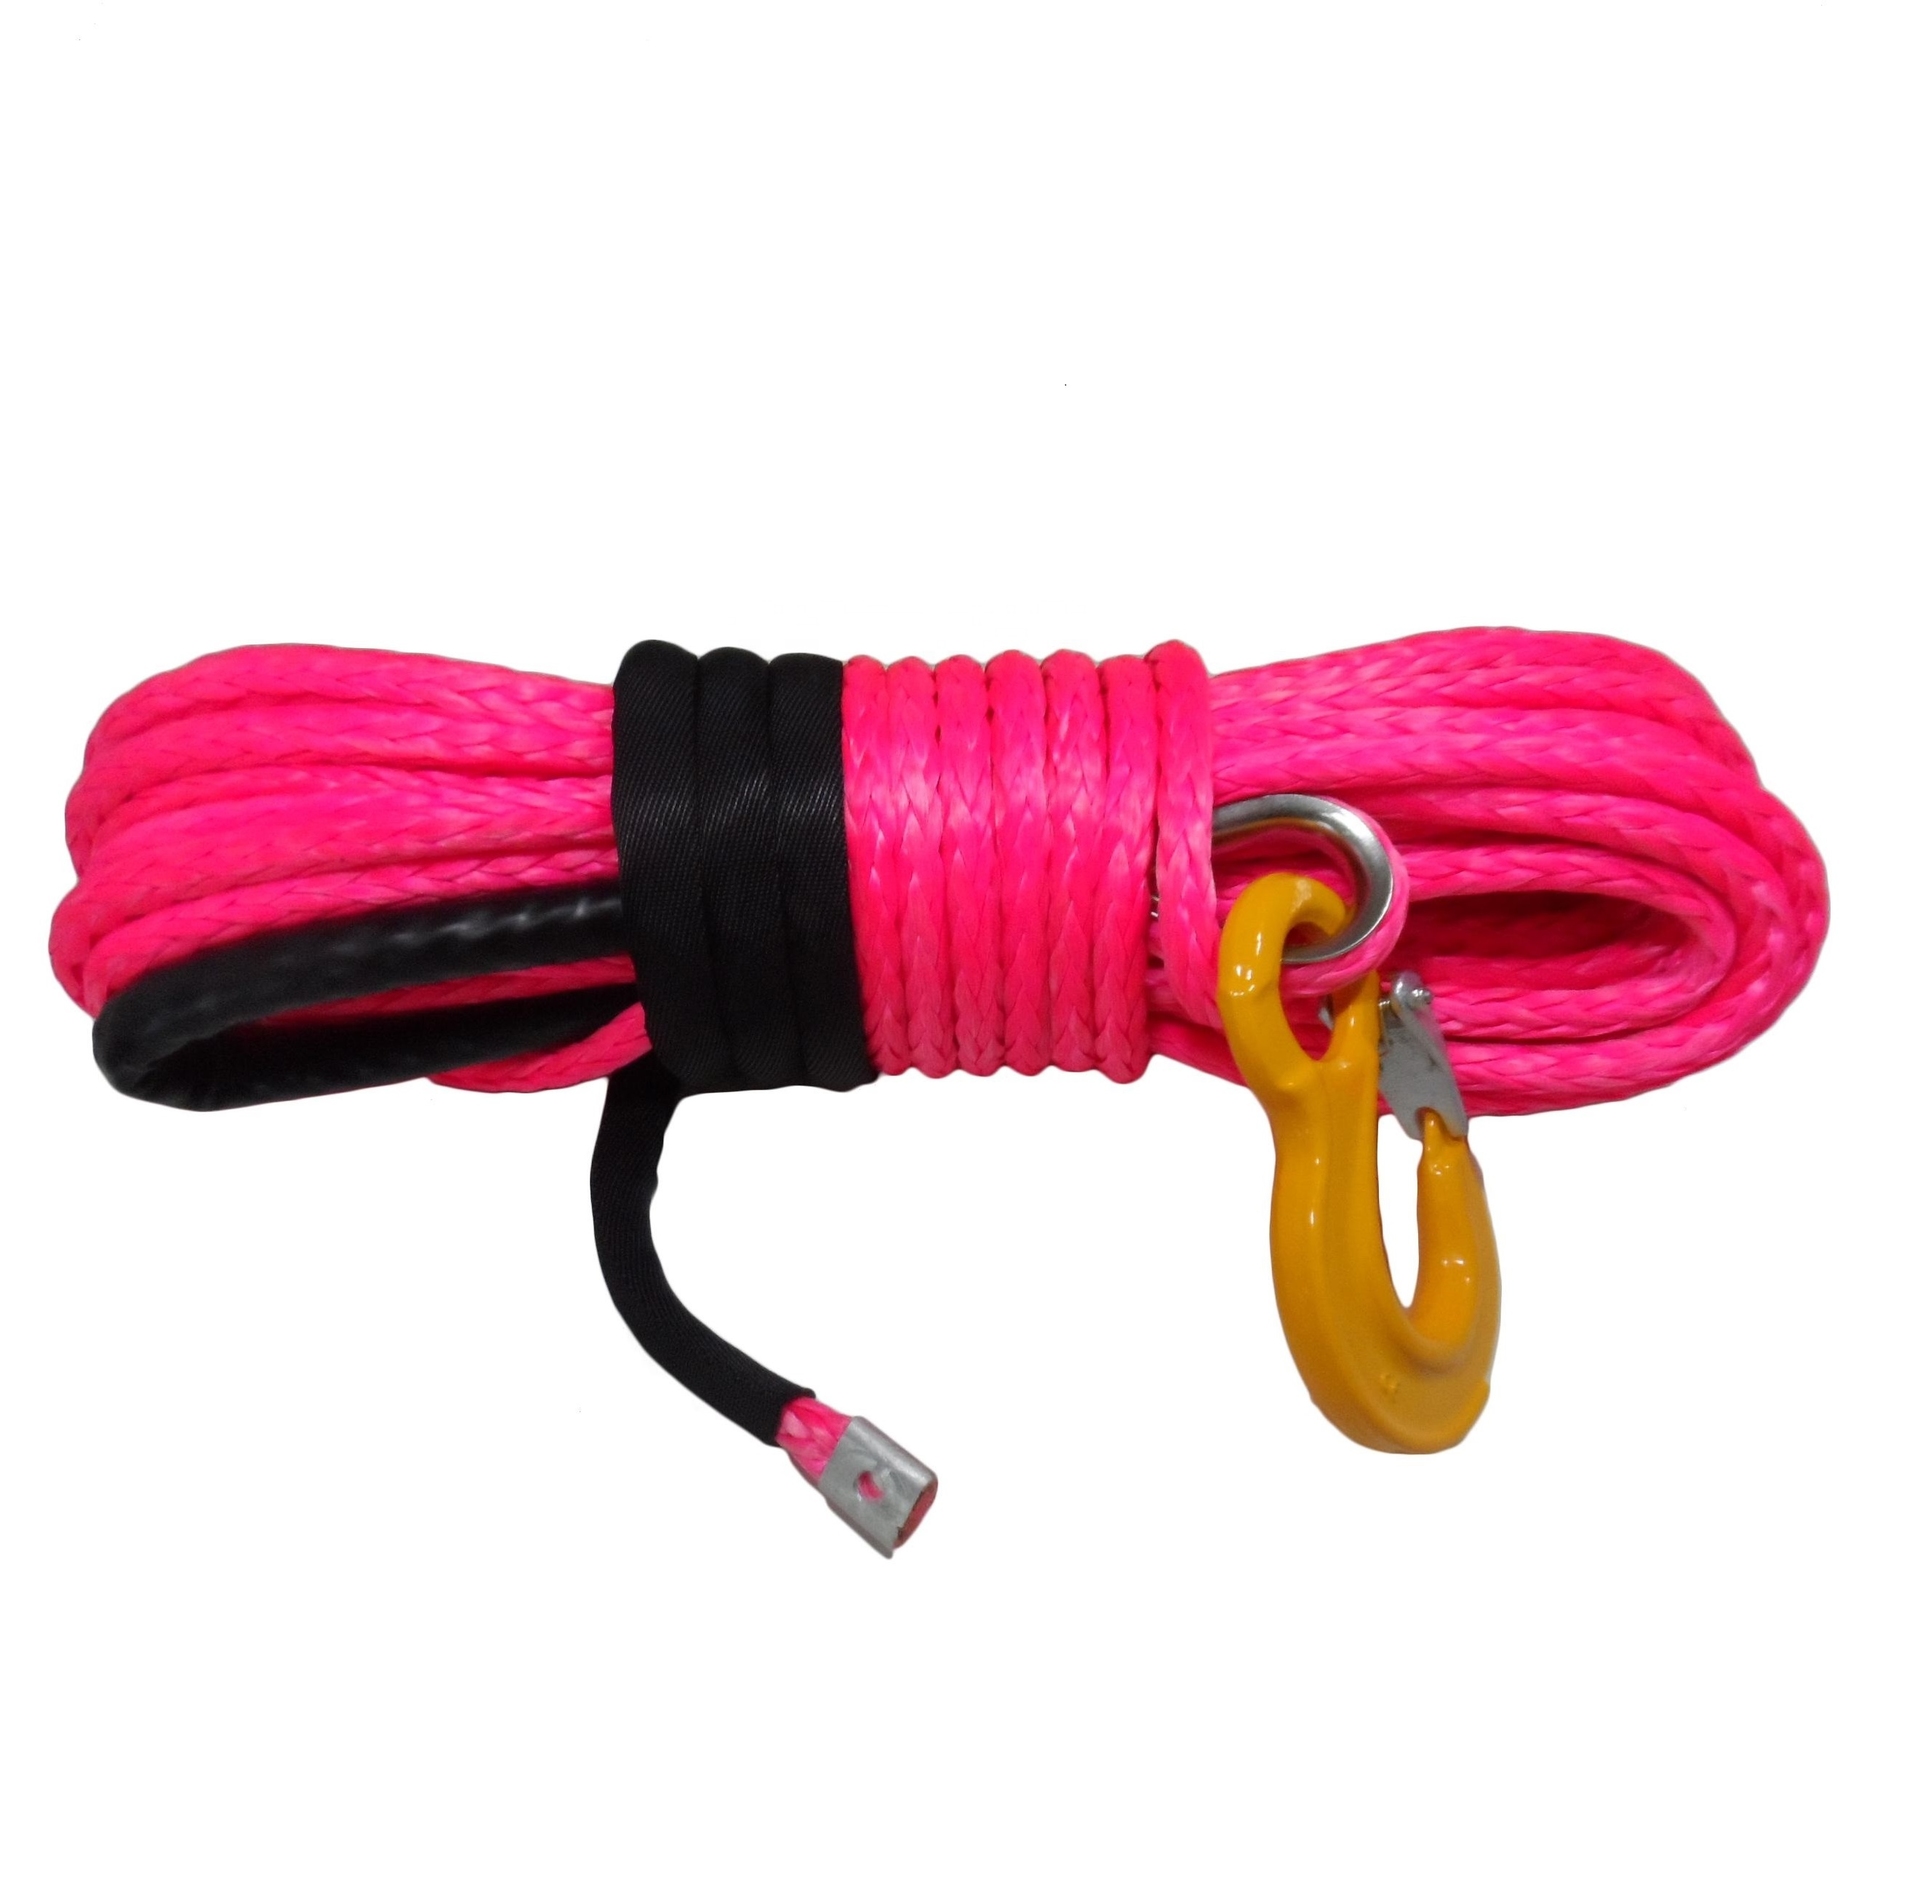 High qualitybraided ropelifting ropefor winch or sailing, etc